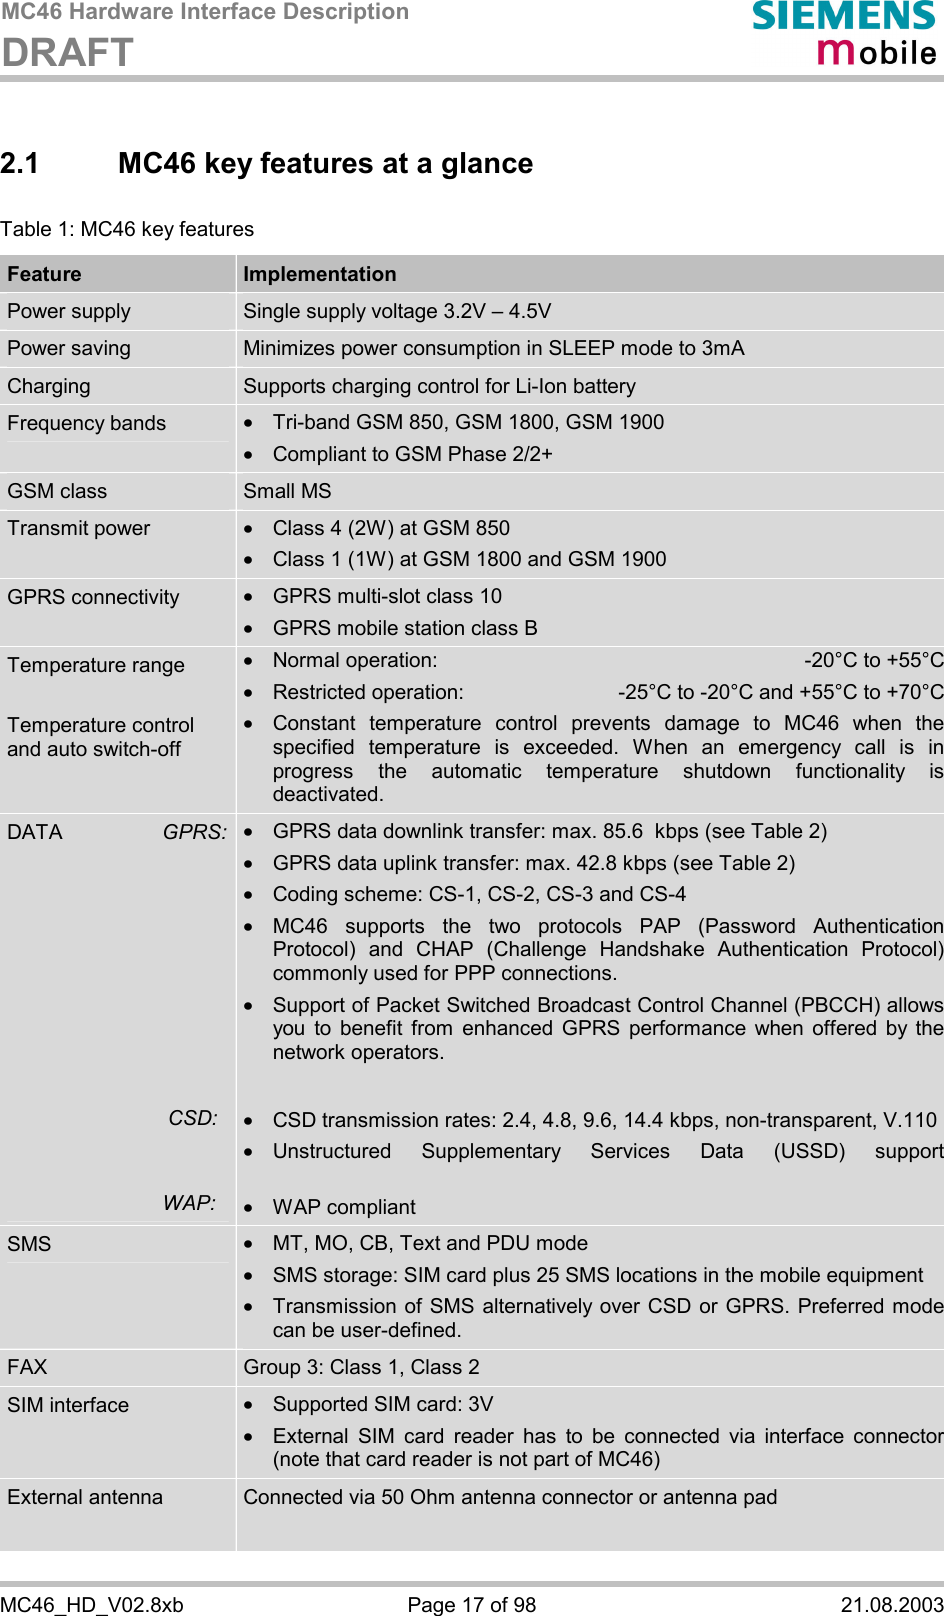 MC46 Hardware Interface Description DRAFT      MC46_HD_V02.8xb  Page 17 of 98  21.08.2003 2.1  MC46 key features at a glance Table 1: MC46 key features  Feature  Implementation Power supply  Single supply voltage 3.2V – 4.5V  Power saving  Minimizes power consumption in SLEEP mode to 3mA Charging  Supports charging control for Li-Ion battery Frequency bands  ·  Tri-band GSM 850, GSM 1800, GSM 1900 ·  Compliant to GSM Phase 2/2+ GSM class  Small MS Transmit power  ·  Class 4 (2W) at GSM 850 ·  Class 1 (1W) at GSM 1800 and GSM 1900 GPRS connectivity  ·  GPRS multi-slot class 10 ·  GPRS mobile station class B Temperature range   Temperature control and auto switch-off ·  Normal operation:   -20°C to +55°C ·  Restricted operation:   -25°C to -20°C and +55°C to +70°C·  Constant temperature control prevents damage to MC46 when the specified temperature is exceeded. When an emergency call is in progress the automatic temperature shutdown functionality is deactivated. DATA  GPRS:            CSD:    WAP: ·  GPRS data downlink transfer: max. 85.6  kbps (see Table 2) ·  GPRS data uplink transfer: max. 42.8 kbps (see Table 2) ·  Coding scheme: CS-1, CS-2, CS-3 and CS-4 ·  MC46 supports the two protocols PAP (Password Authentication Protocol) and CHAP (Challenge Handshake Authentication Protocol) commonly used for PPP connections. ·  Support of Packet Switched Broadcast Control Channel (PBCCH) allows you to benefit from enhanced GPRS performance when offered by the network operators.   ·  CSD transmission rates: 2.4, 4.8, 9.6, 14.4 kbps, non-transparent, V.110 ·  Unstructured Supplementary Services Data (USSD) support  ·  WAP compliant SMS  ·  MT, MO, CB, Text and PDU mode ·  SMS storage: SIM card plus 25 SMS locations in the mobile equipment ·  Transmission of SMS alternatively over CSD or GPRS. Preferred mode can be user-defined. FAX  Group 3: Class 1, Class 2 SIM interface ·  Supported SIM card: 3V ·  External SIM card reader has to be connected via interface connector (note that card reader is not part of MC46) External antenna  Connected via 50 Ohm antenna connector or antenna pad  